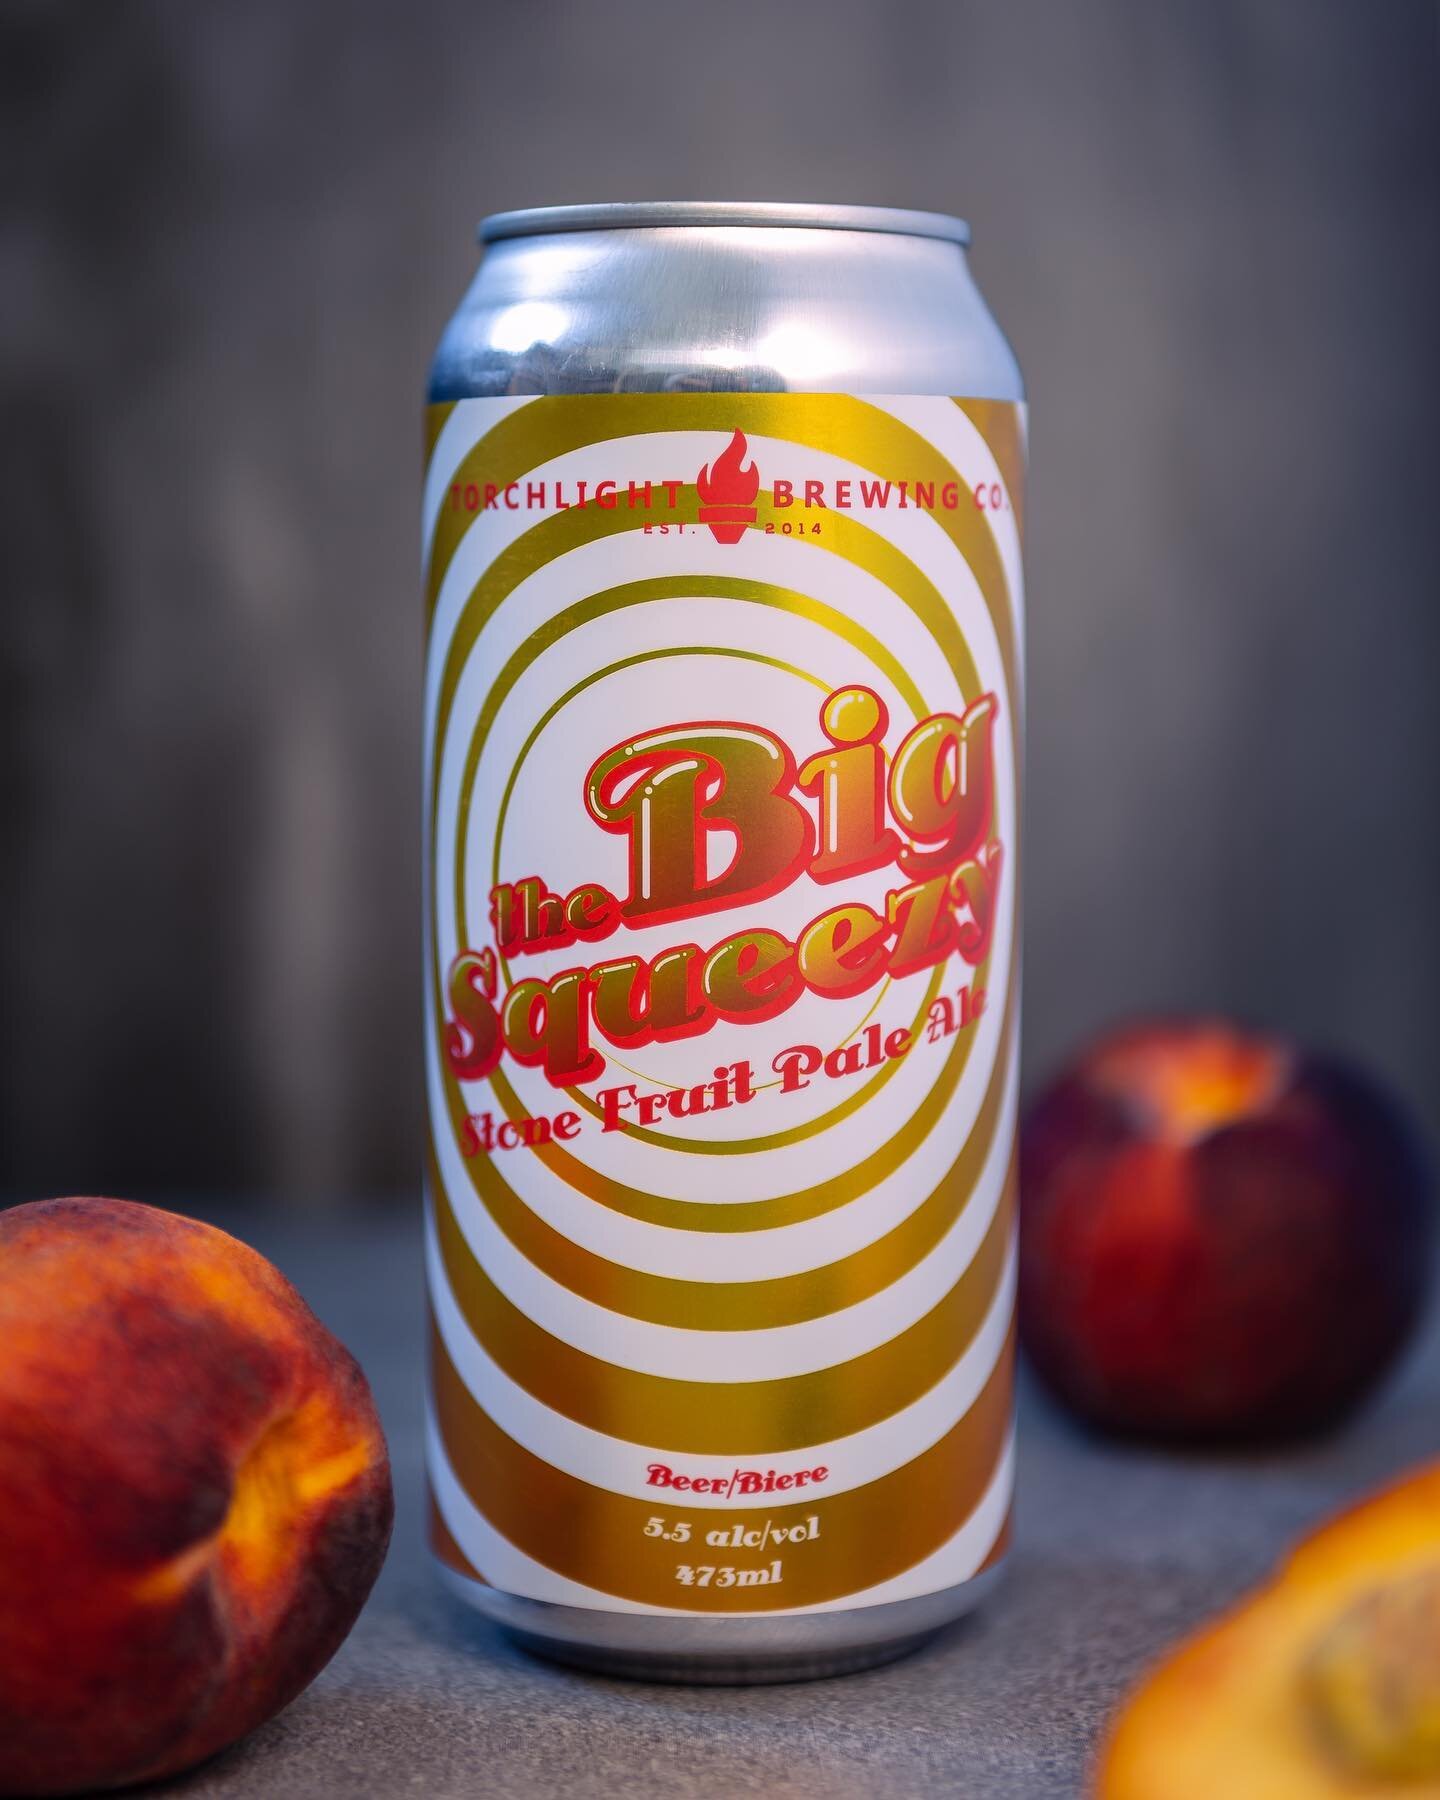 IT&rsquo;S BACK!

We are so stoked to tell you that The Big Squeezy is back on tap and in cans as of today!
Packed full of punchy, quaffable, stone fruit flavour, this local favourite is a staple of summer. Stop by the brewery today and check it out 